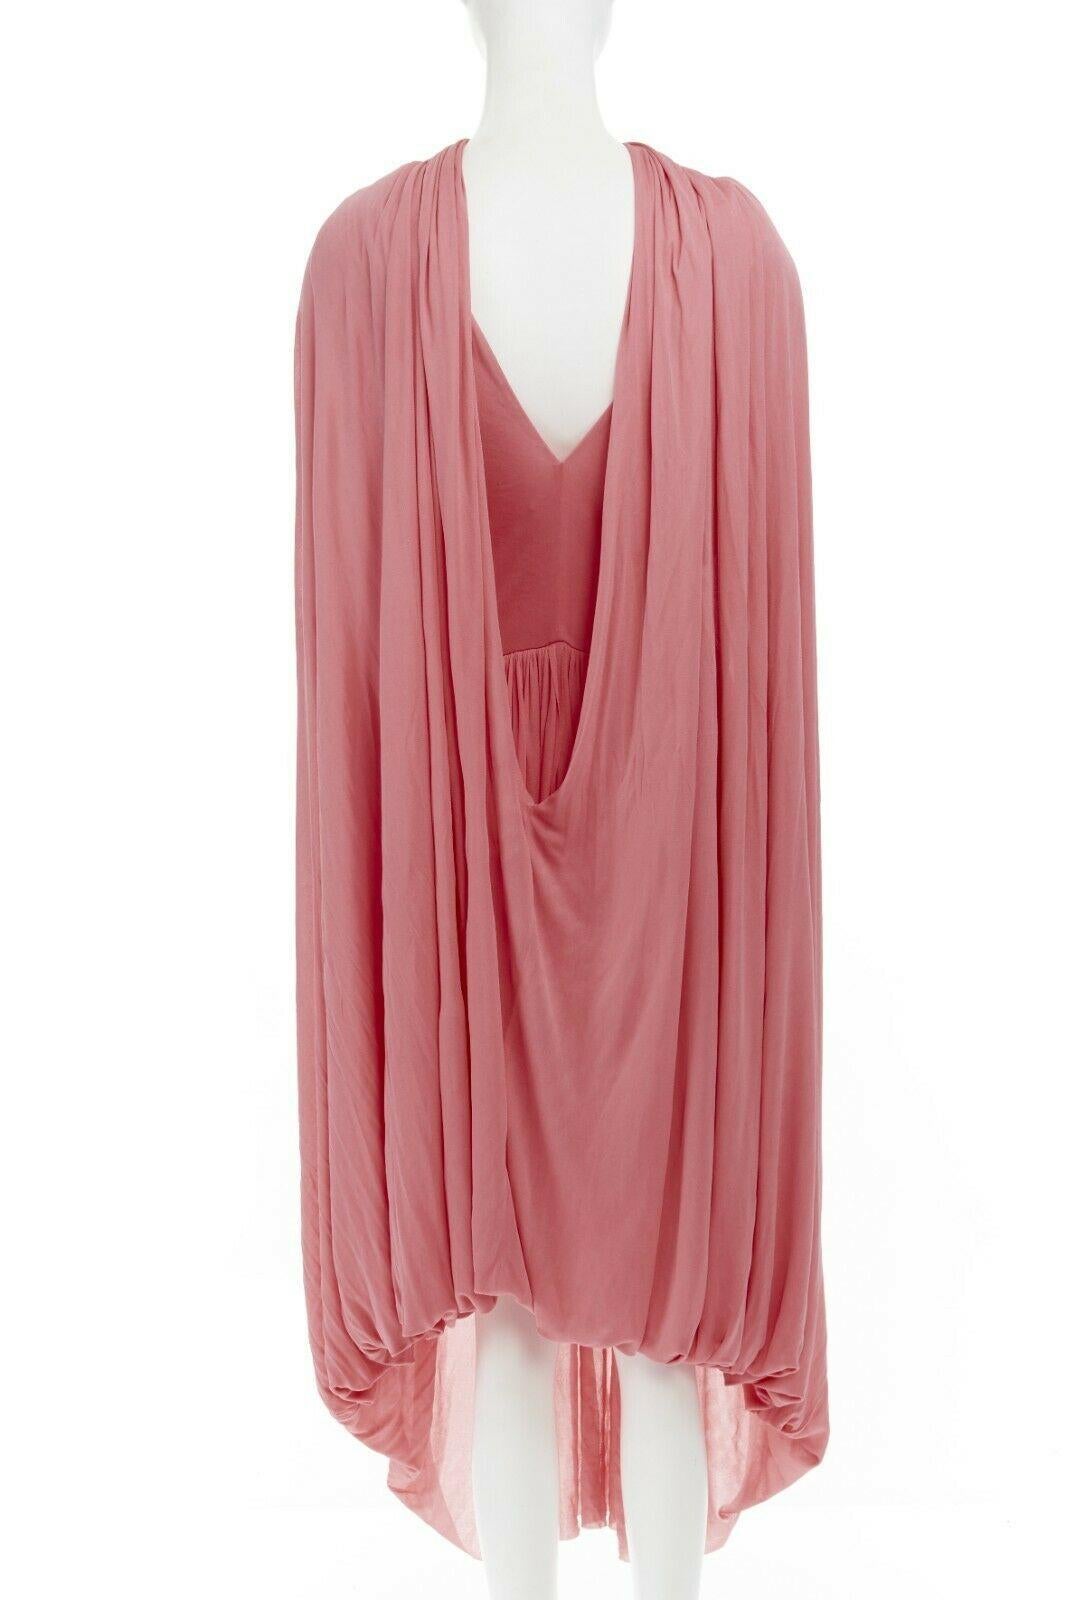 runway CELINE PHOEBE PHILO pink fluid viscose draped cape midi dress FR36 S
CELINE BY PHOEBE PHILO
Fluid cape dress. 
Pink viscose. V-neck. 
Sleeveless. Pleated skirt. 
Attached cape detail at skirt to be worn around neck. 
Concealed zip closure.